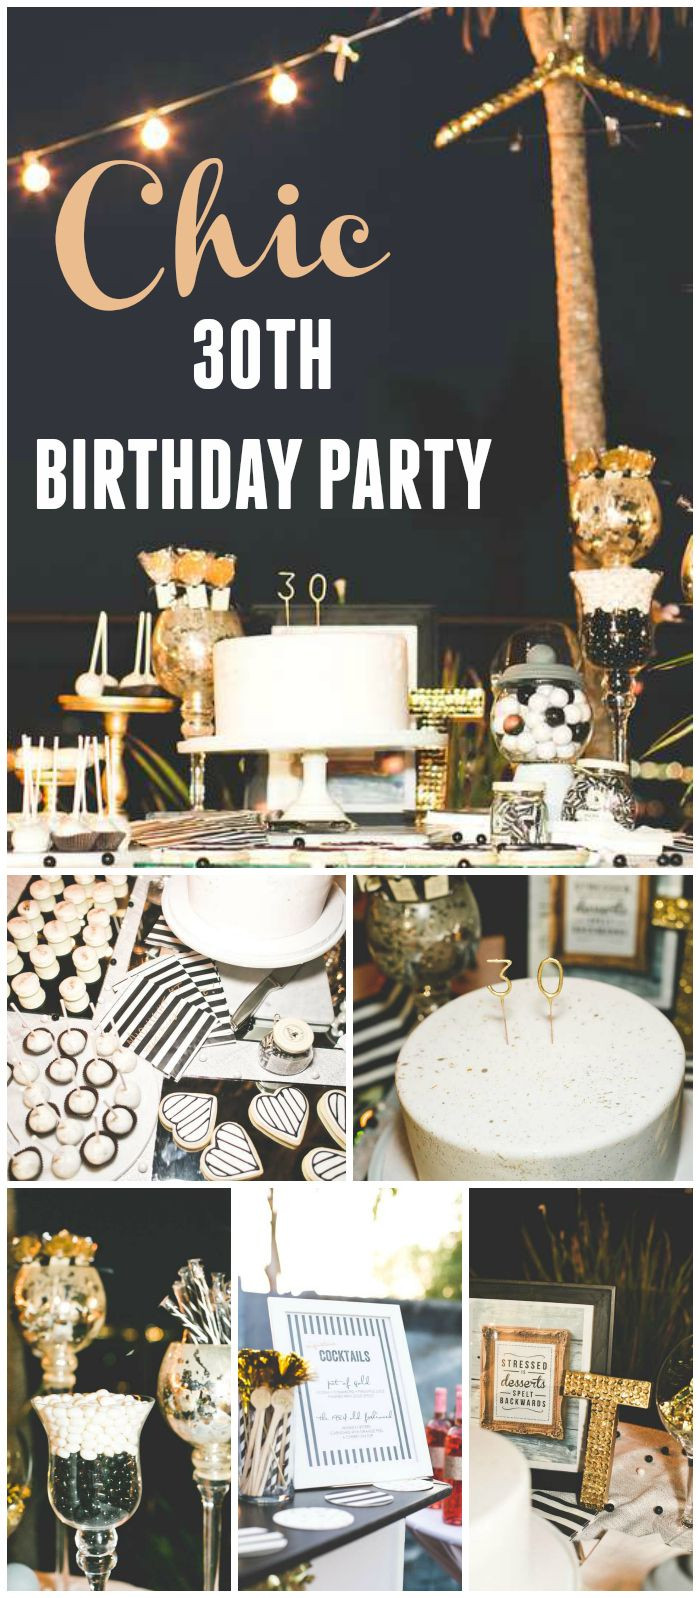 Thirtieth Birthday Party Ideas
 A 30th birthday cocktail event decorated in black & white